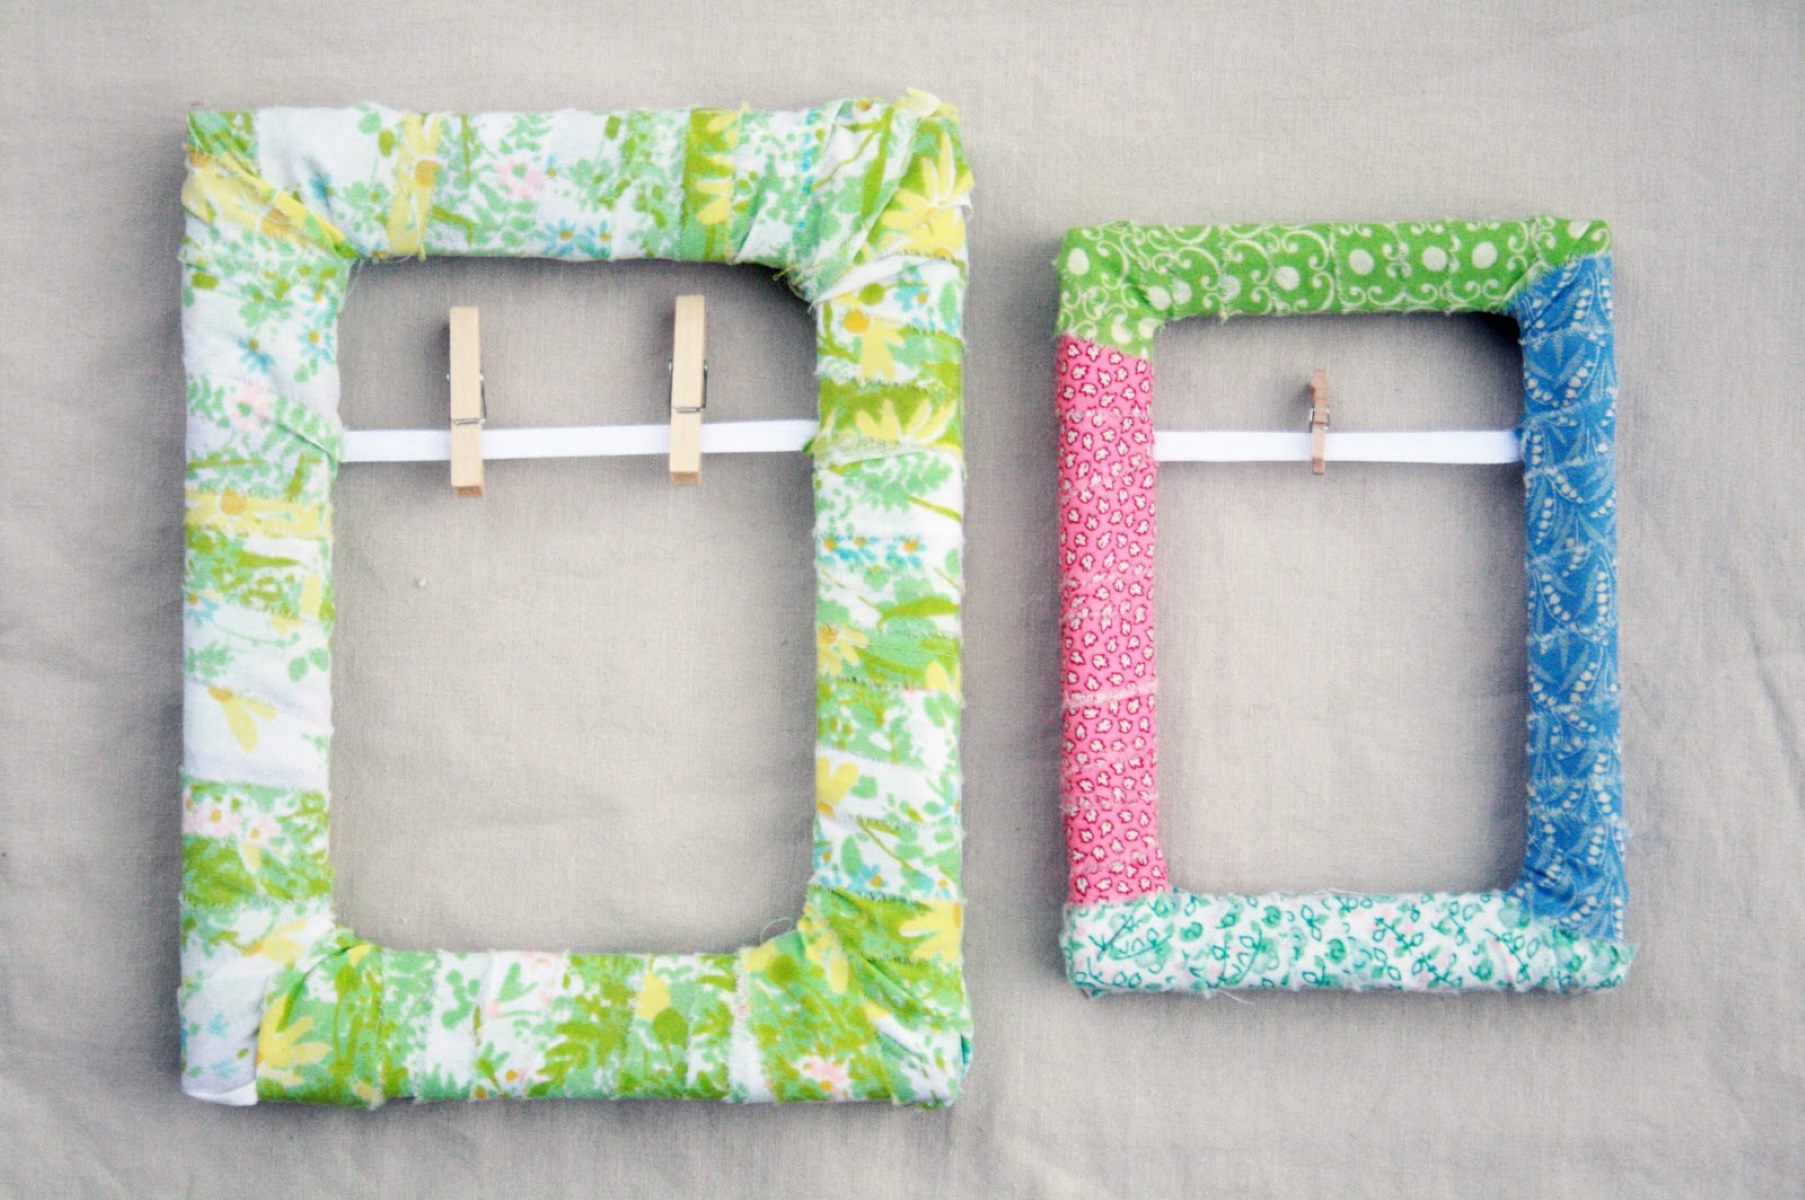 How To Make Fabric-Covered Picture Frames